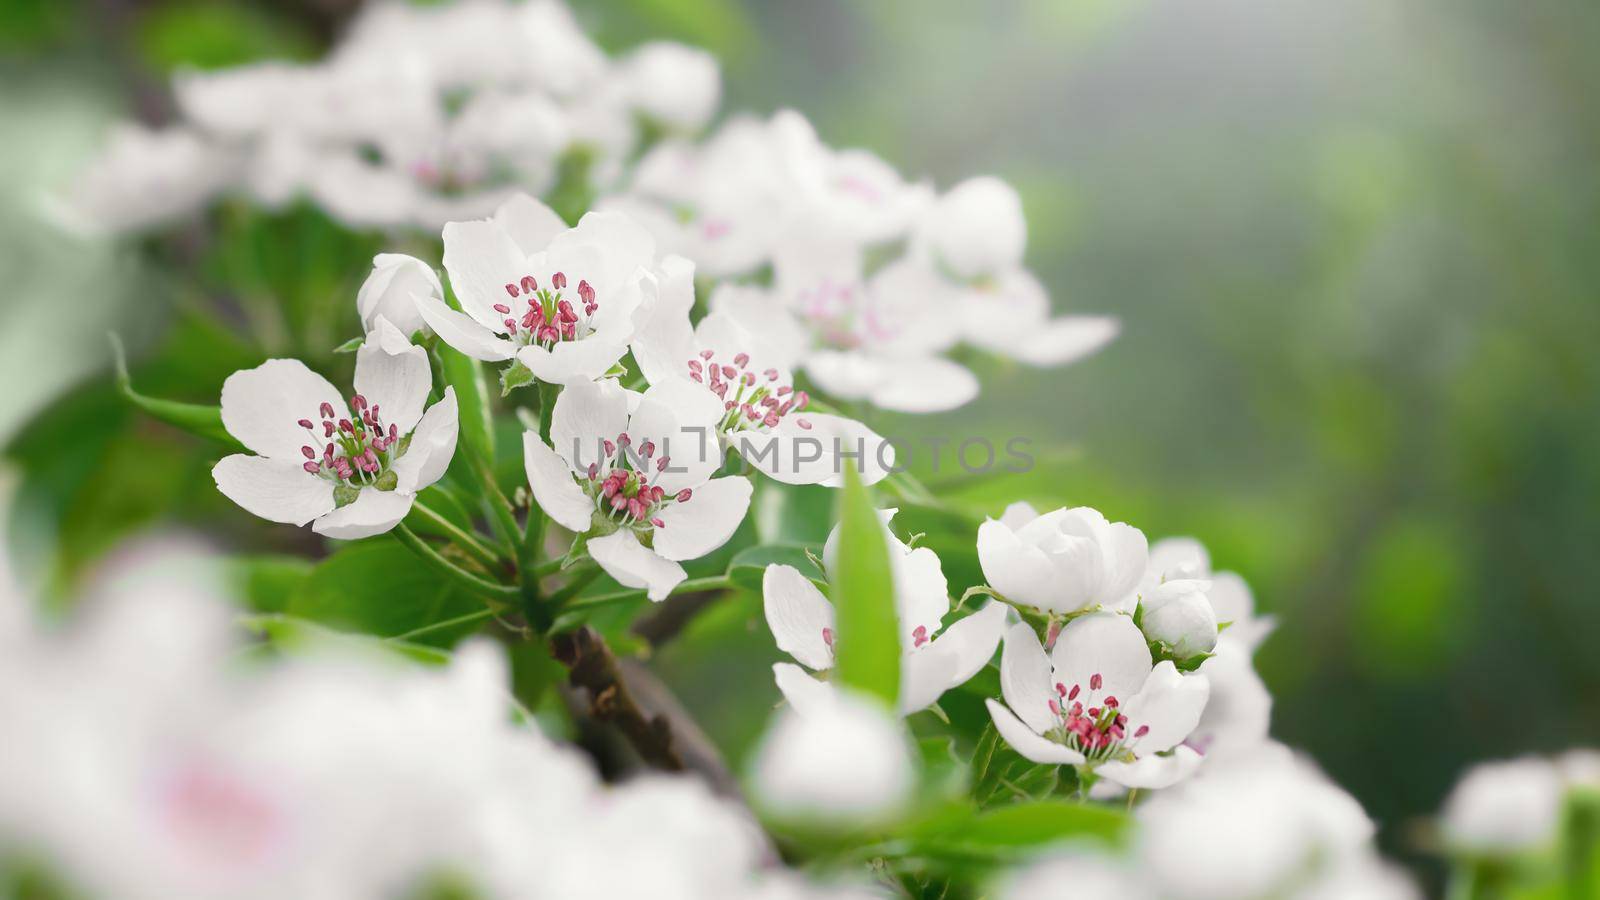 Lush flowering of a pear tree on a spring day in the sun by galsand